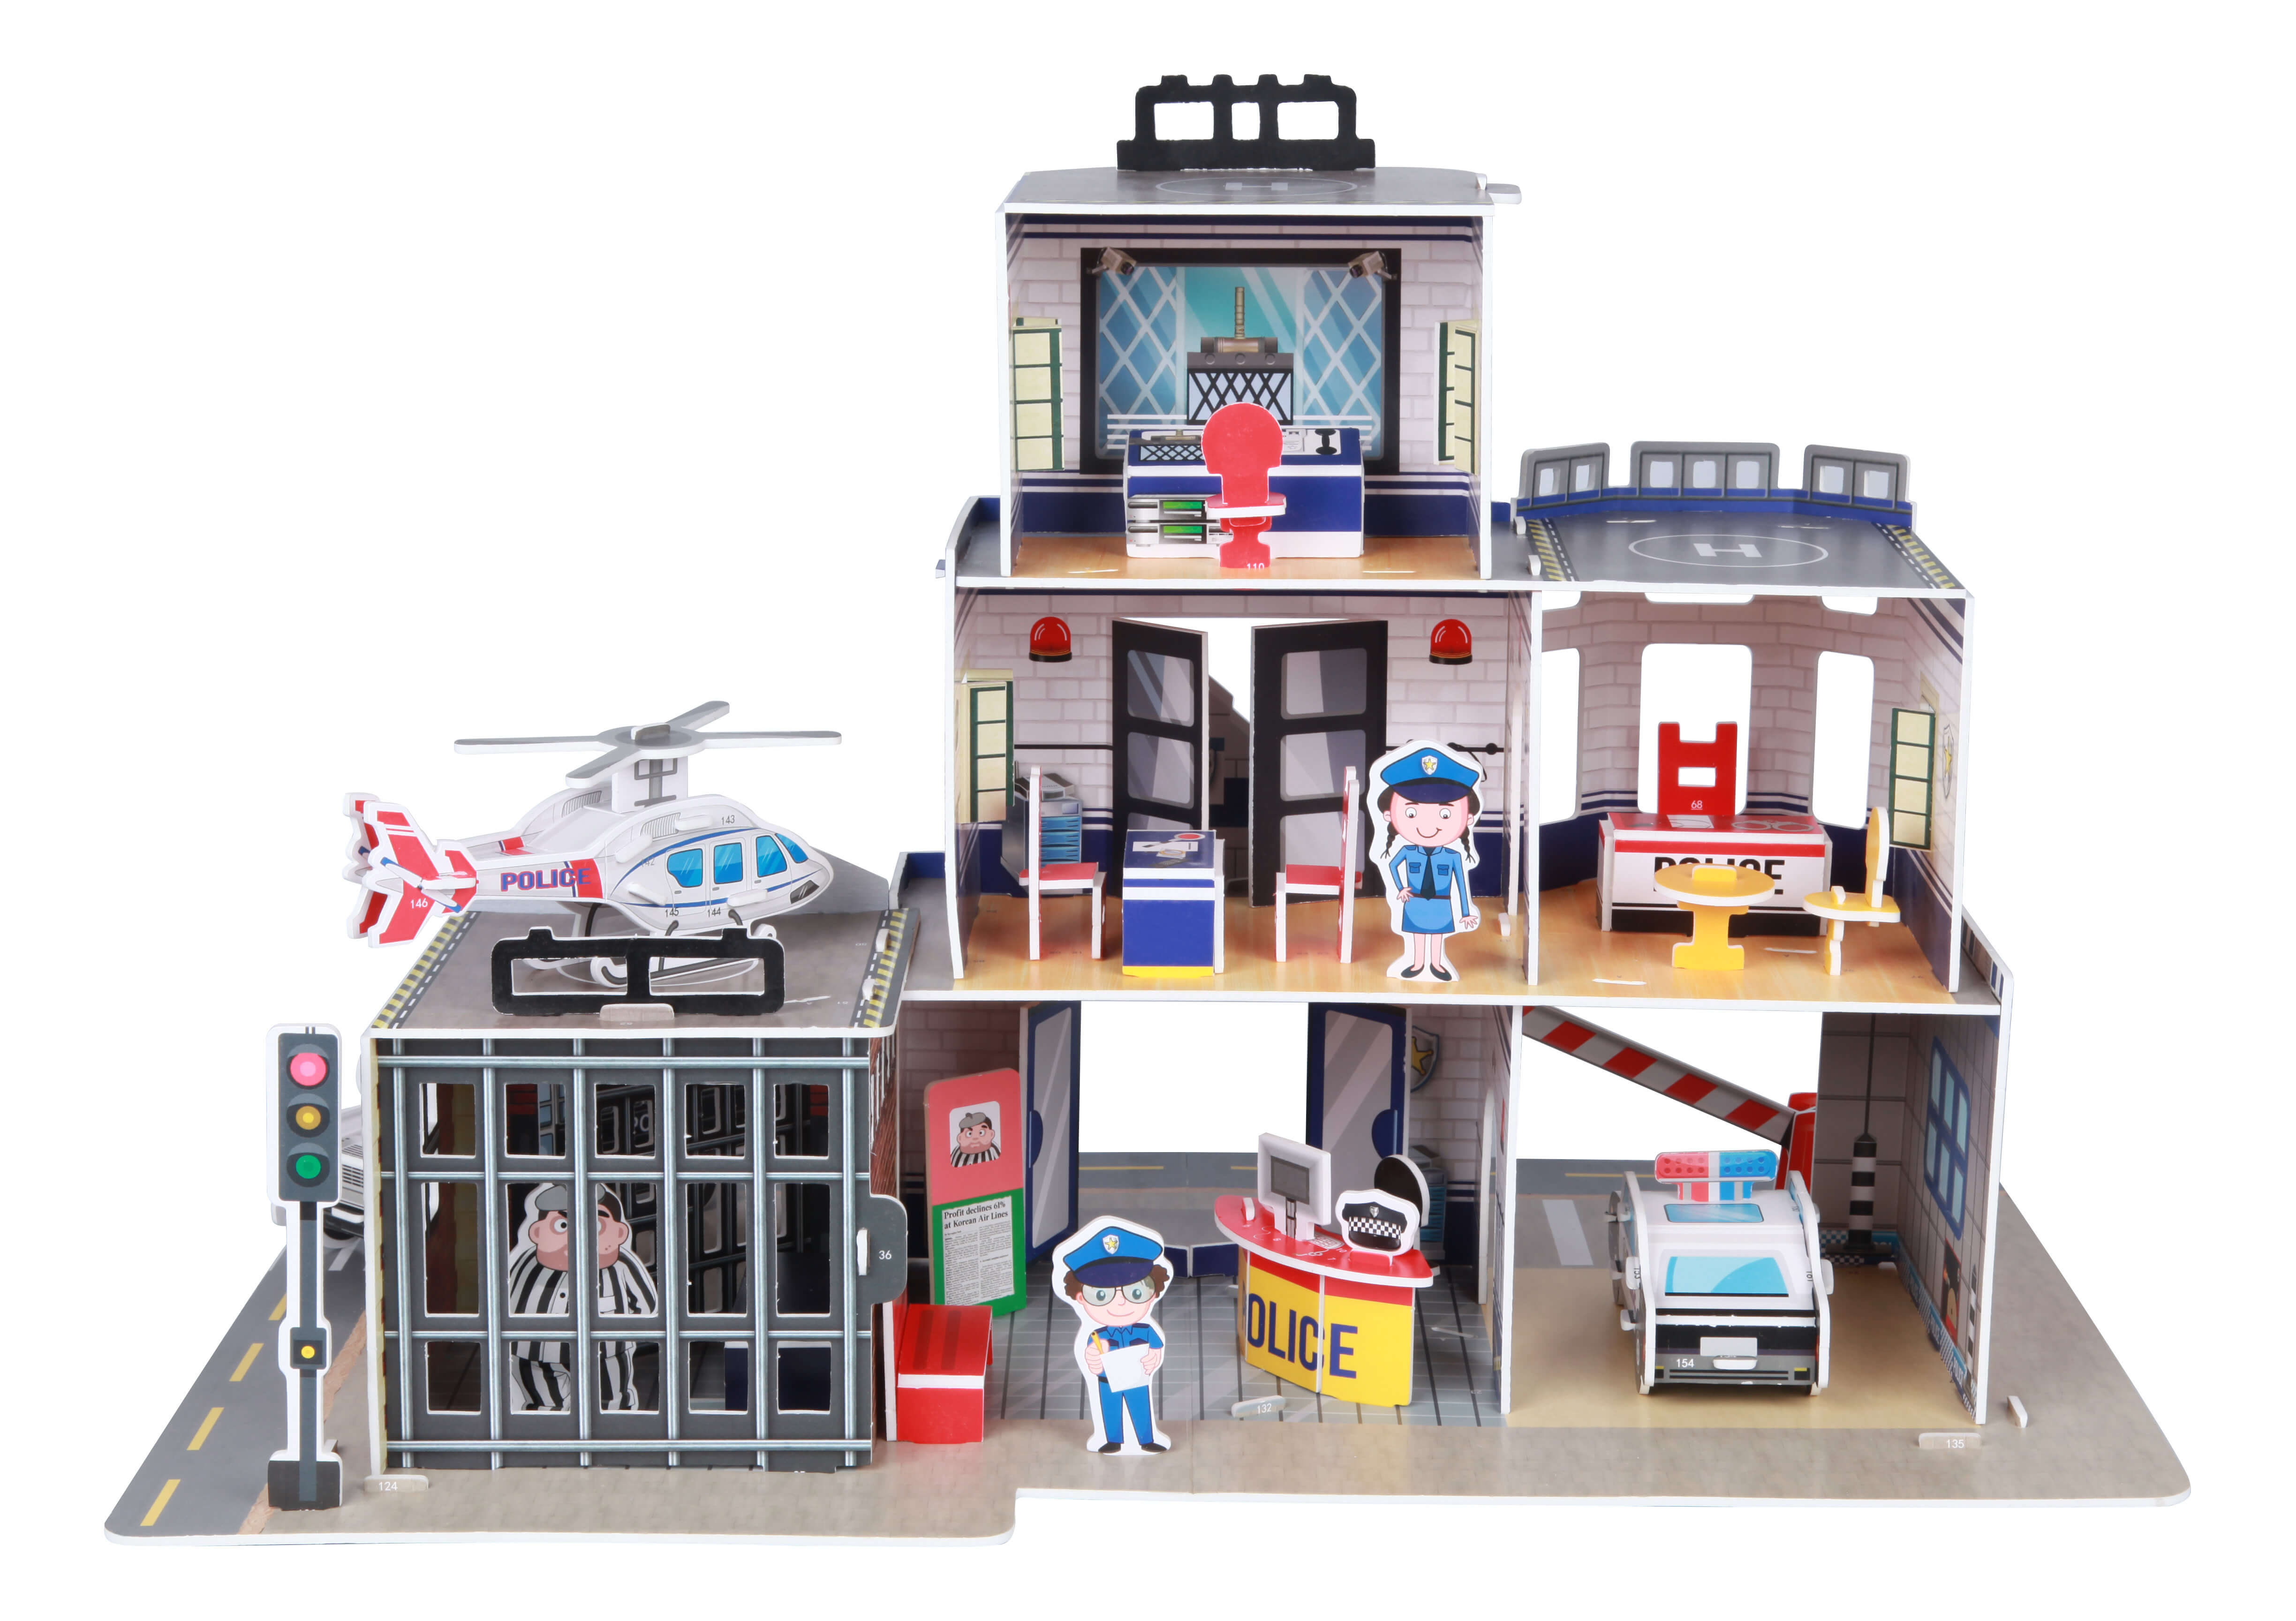 3D toy police station - Fiesta Crafts - Construction Toys at The Toy Room